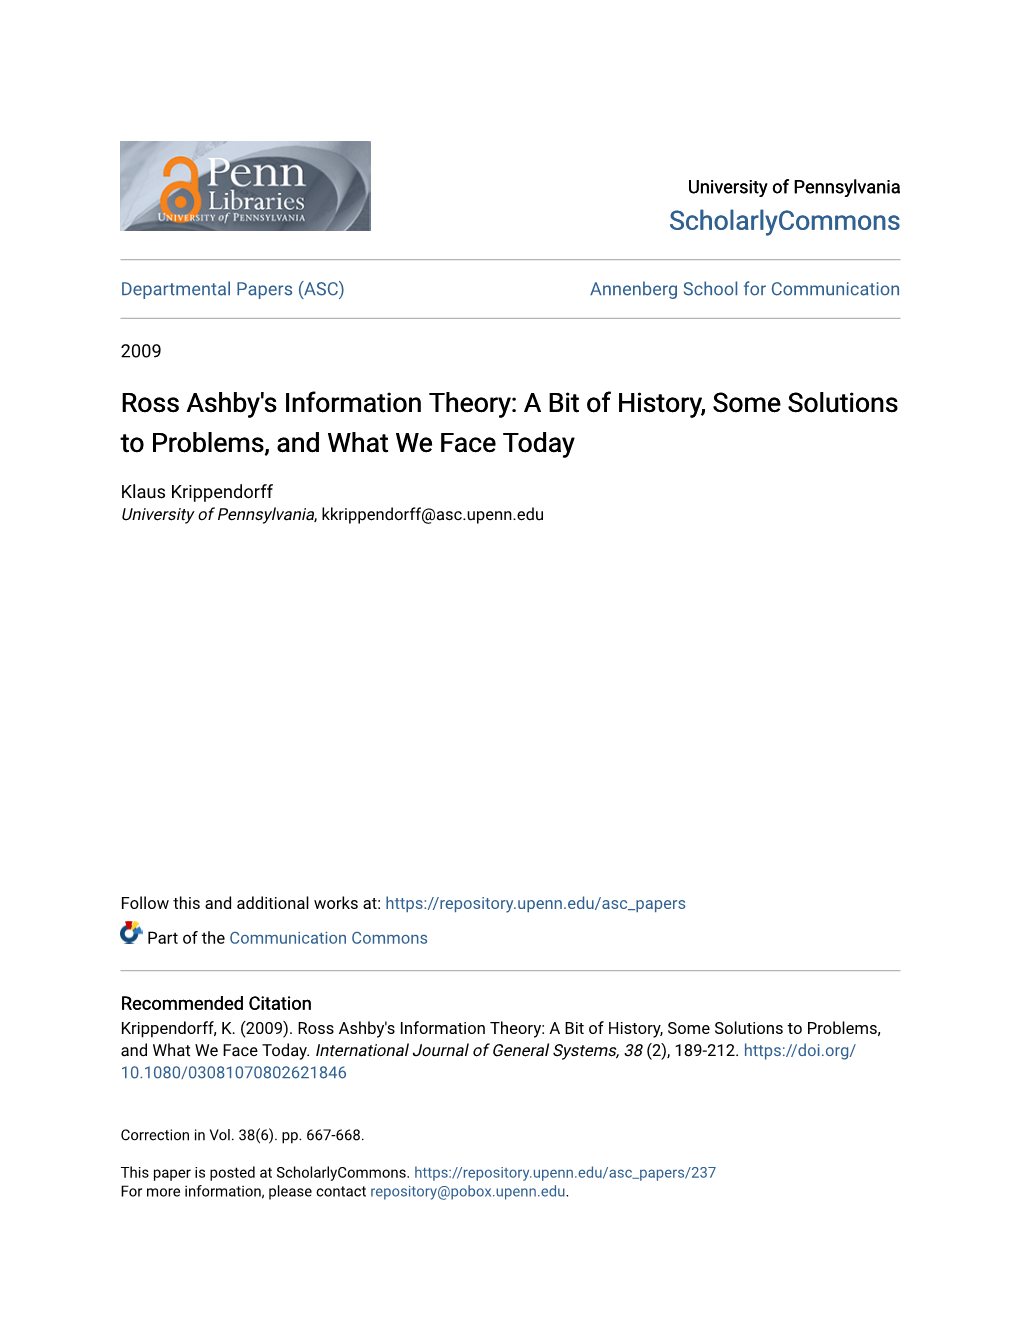 Ross Ashby's Information Theory: a Bit of History, Some Solutions to Problems, and What We Face Today